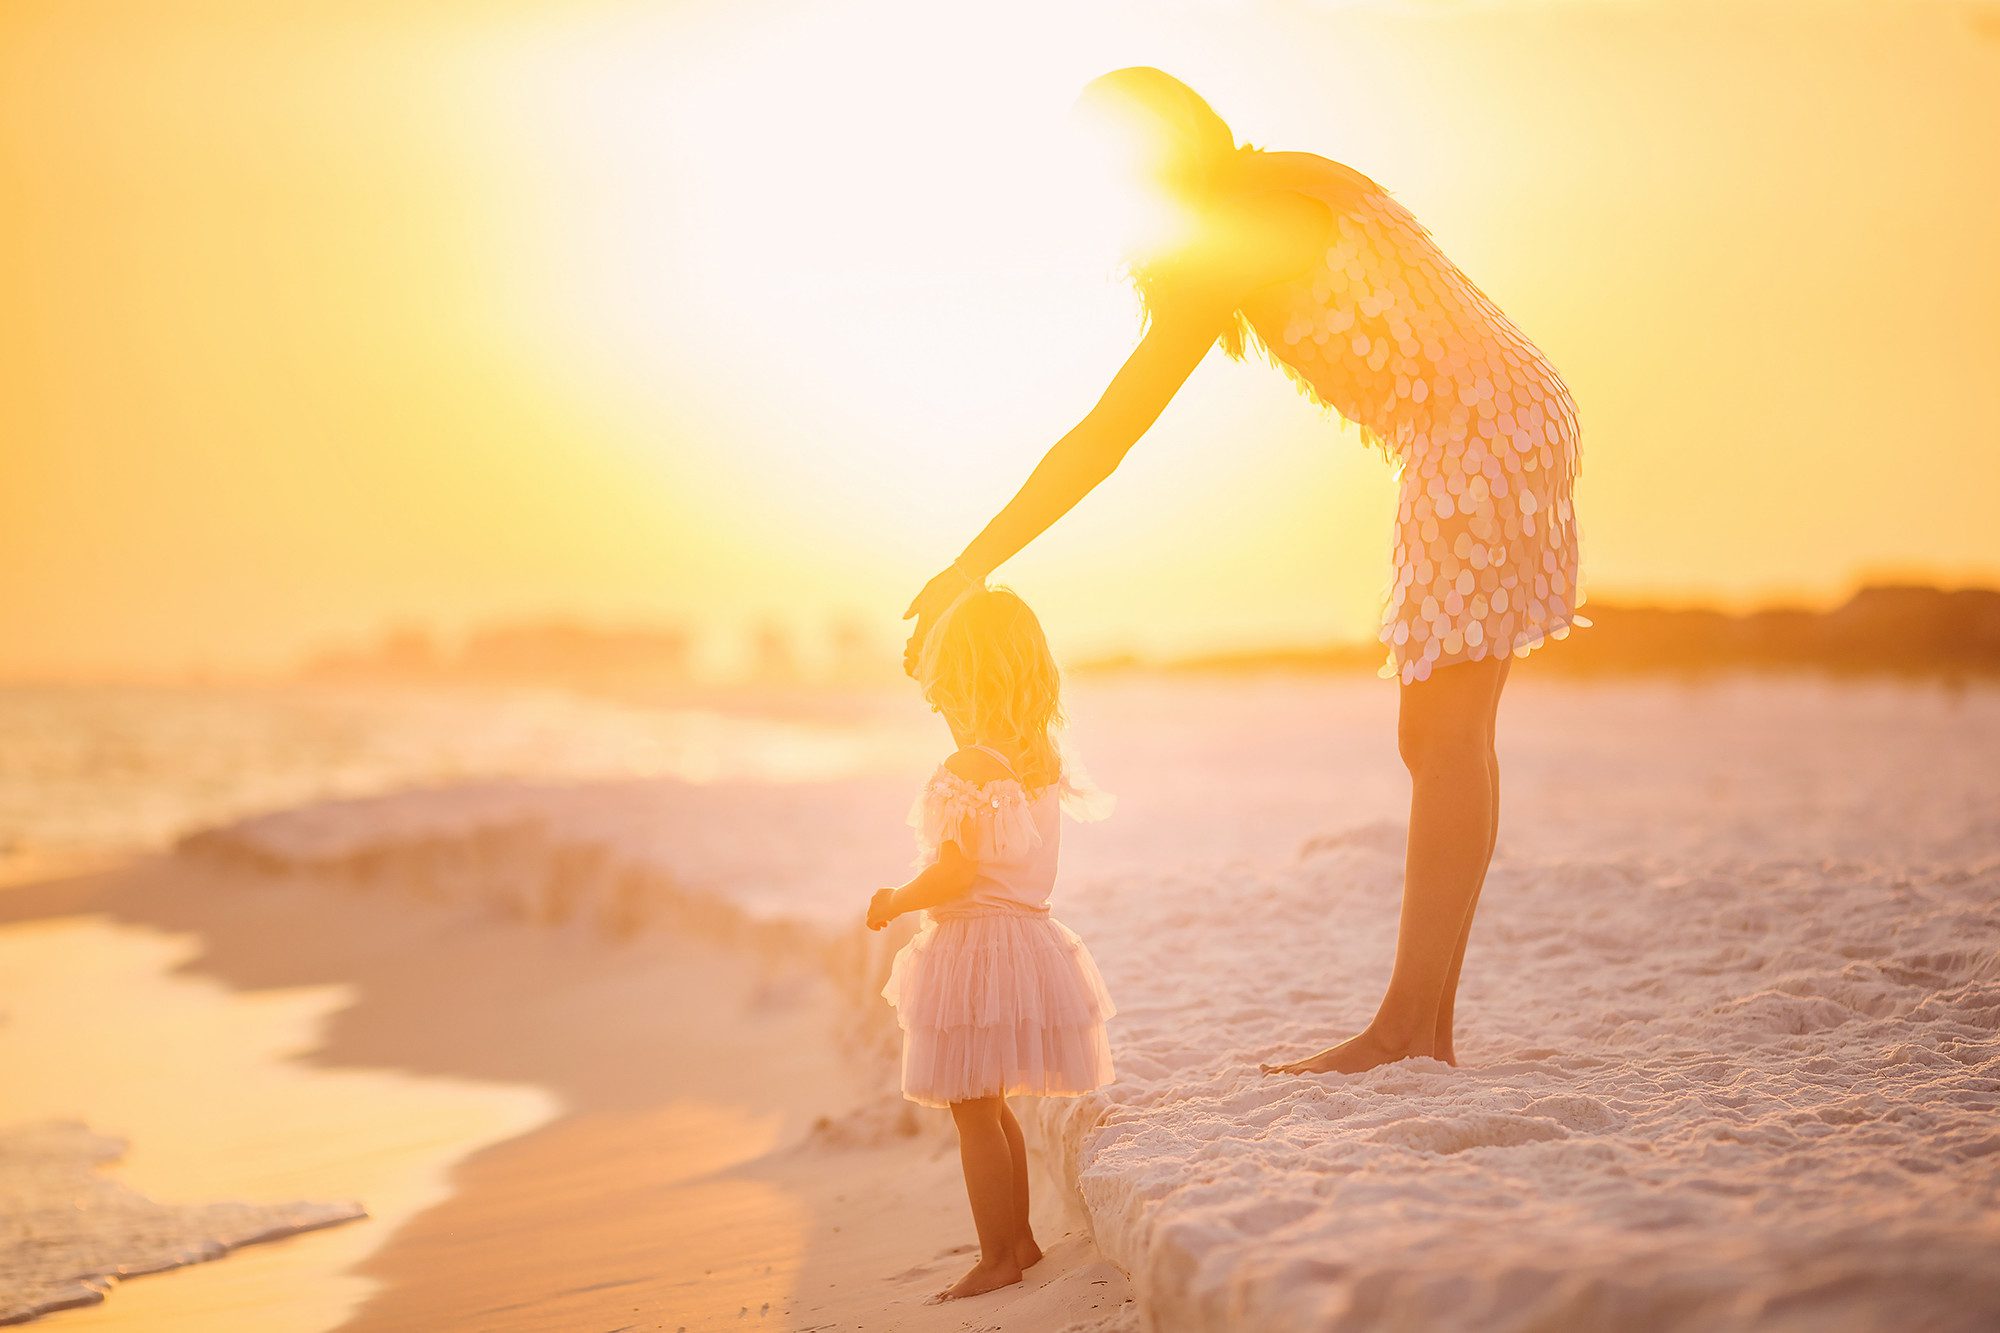 photography session with kanas Pitts a mother and daughter on the beach in Florida they are from milwaukee Wisconsin the mother is holding on to the daughters hand they are wearing pastel colored dresses and the sun is setting behind them